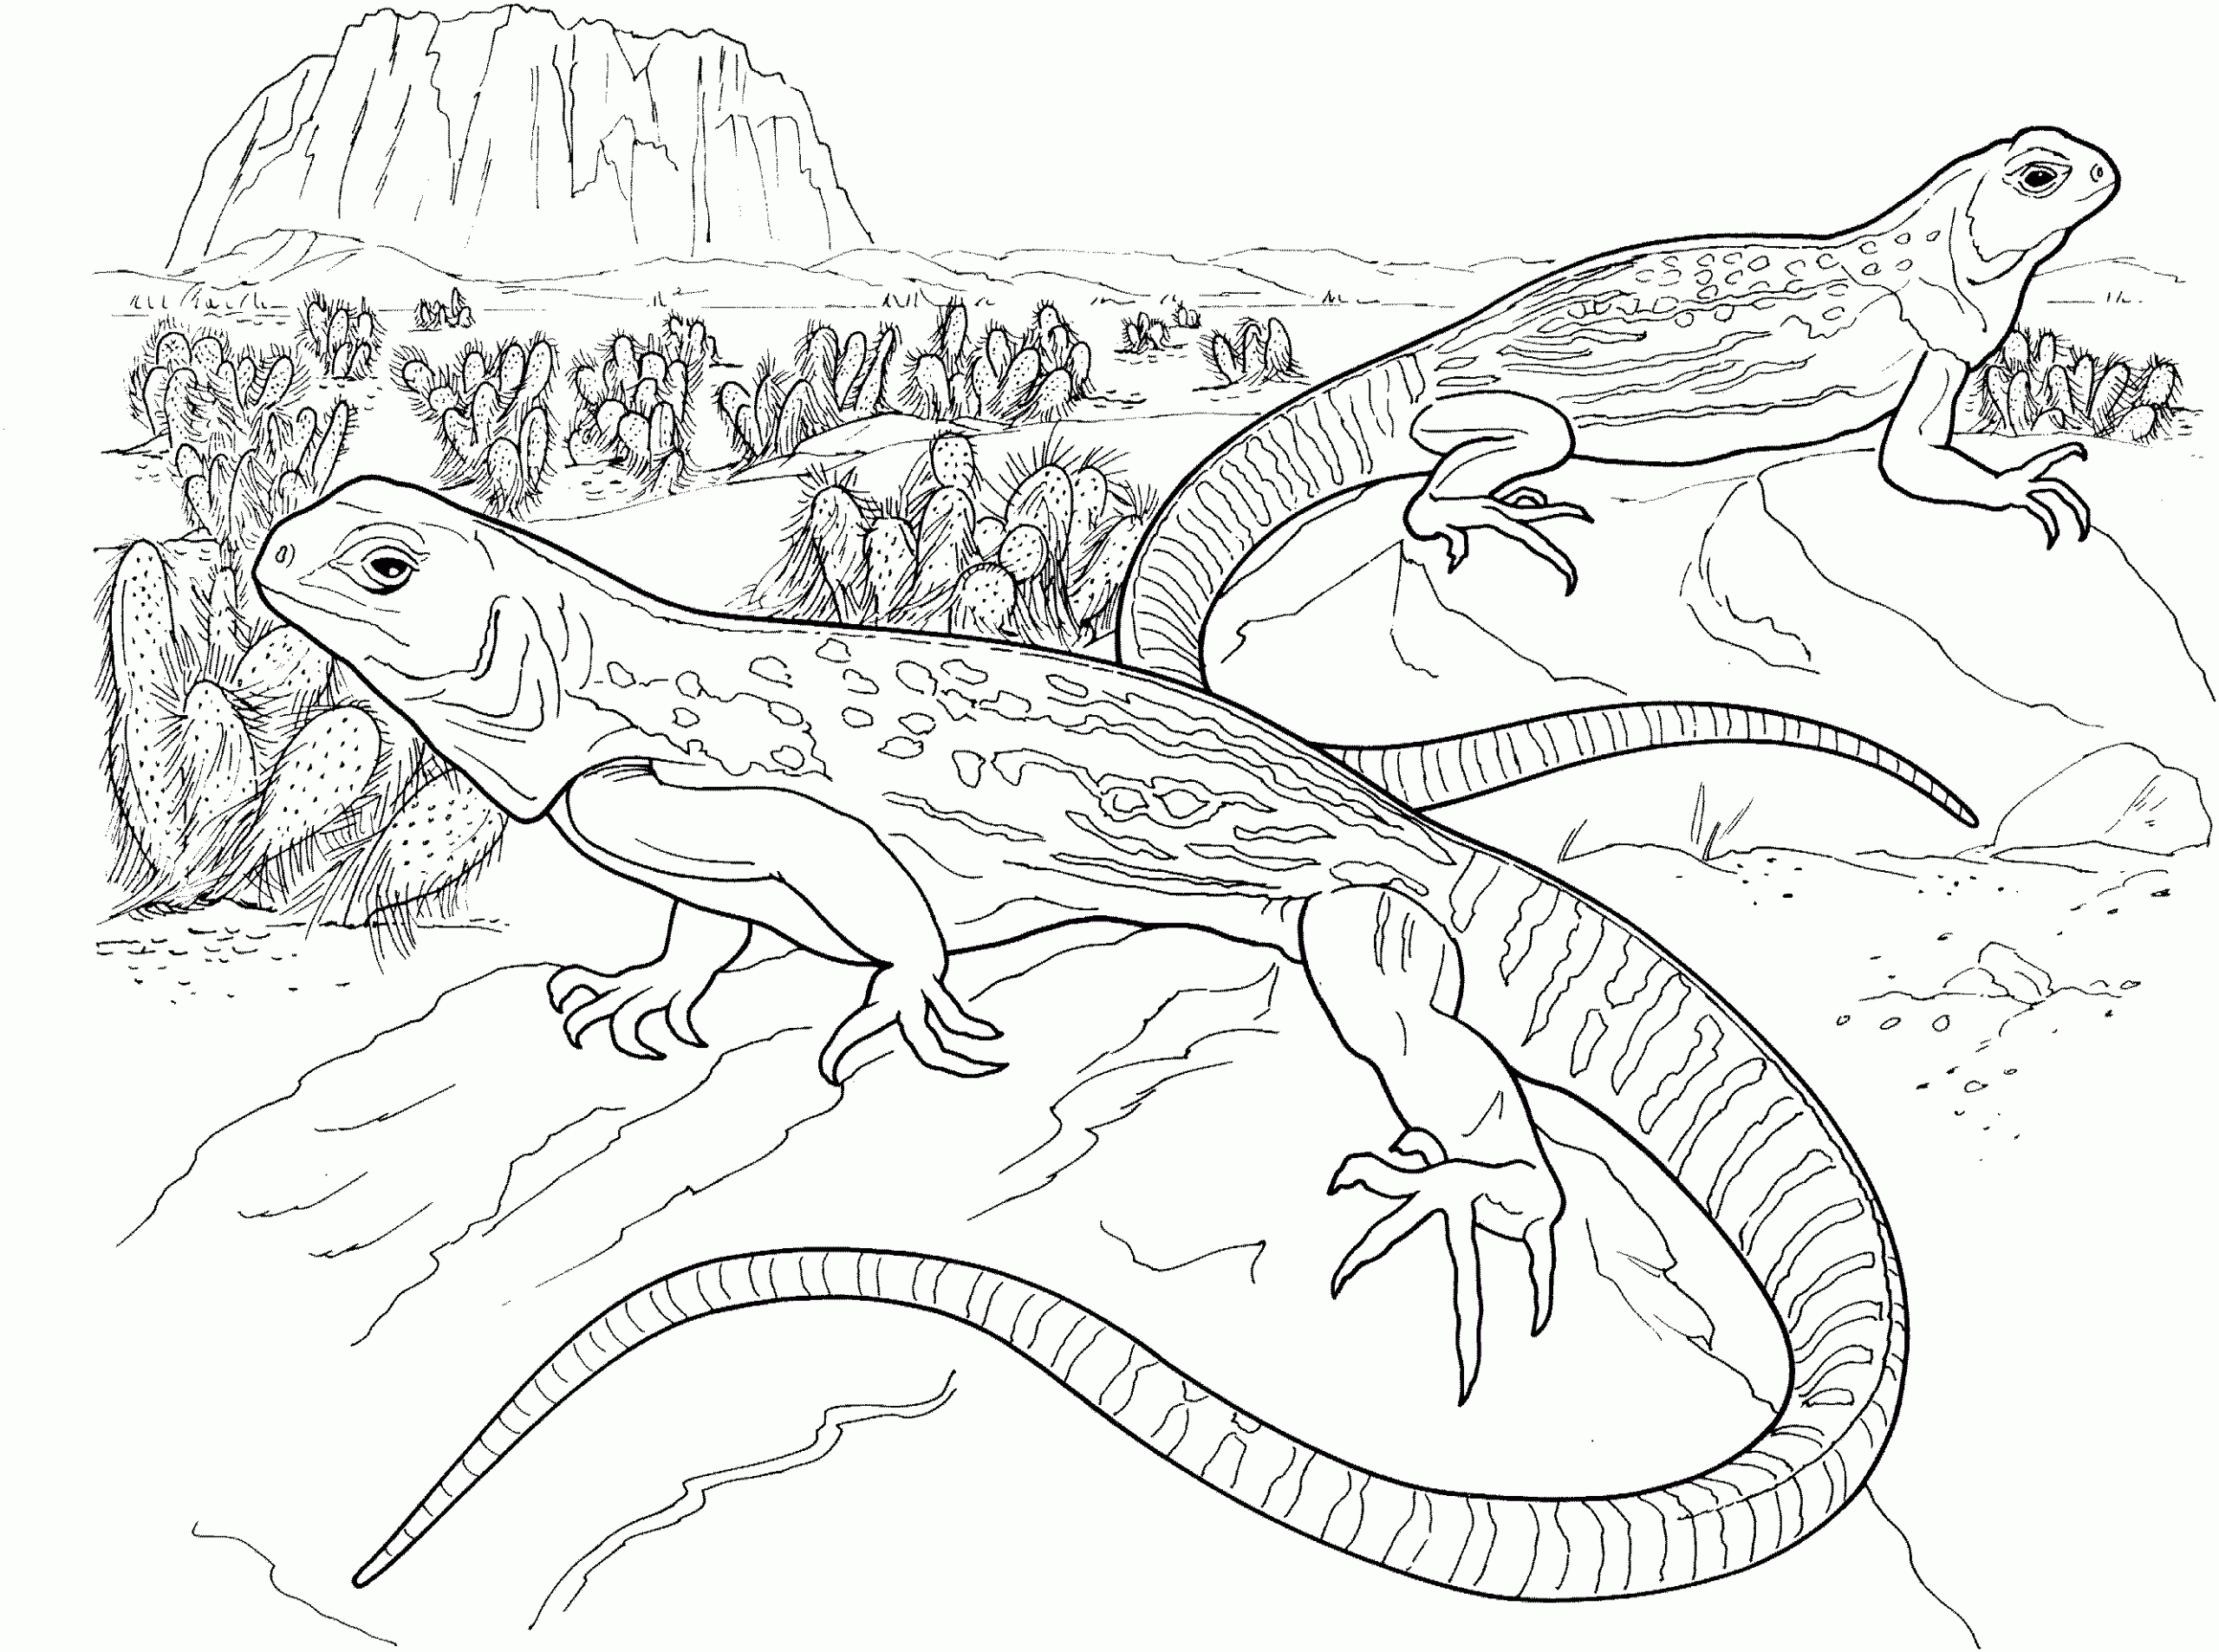 bearded-dragon-coloring-pages-best-coloring-pages-for-kids